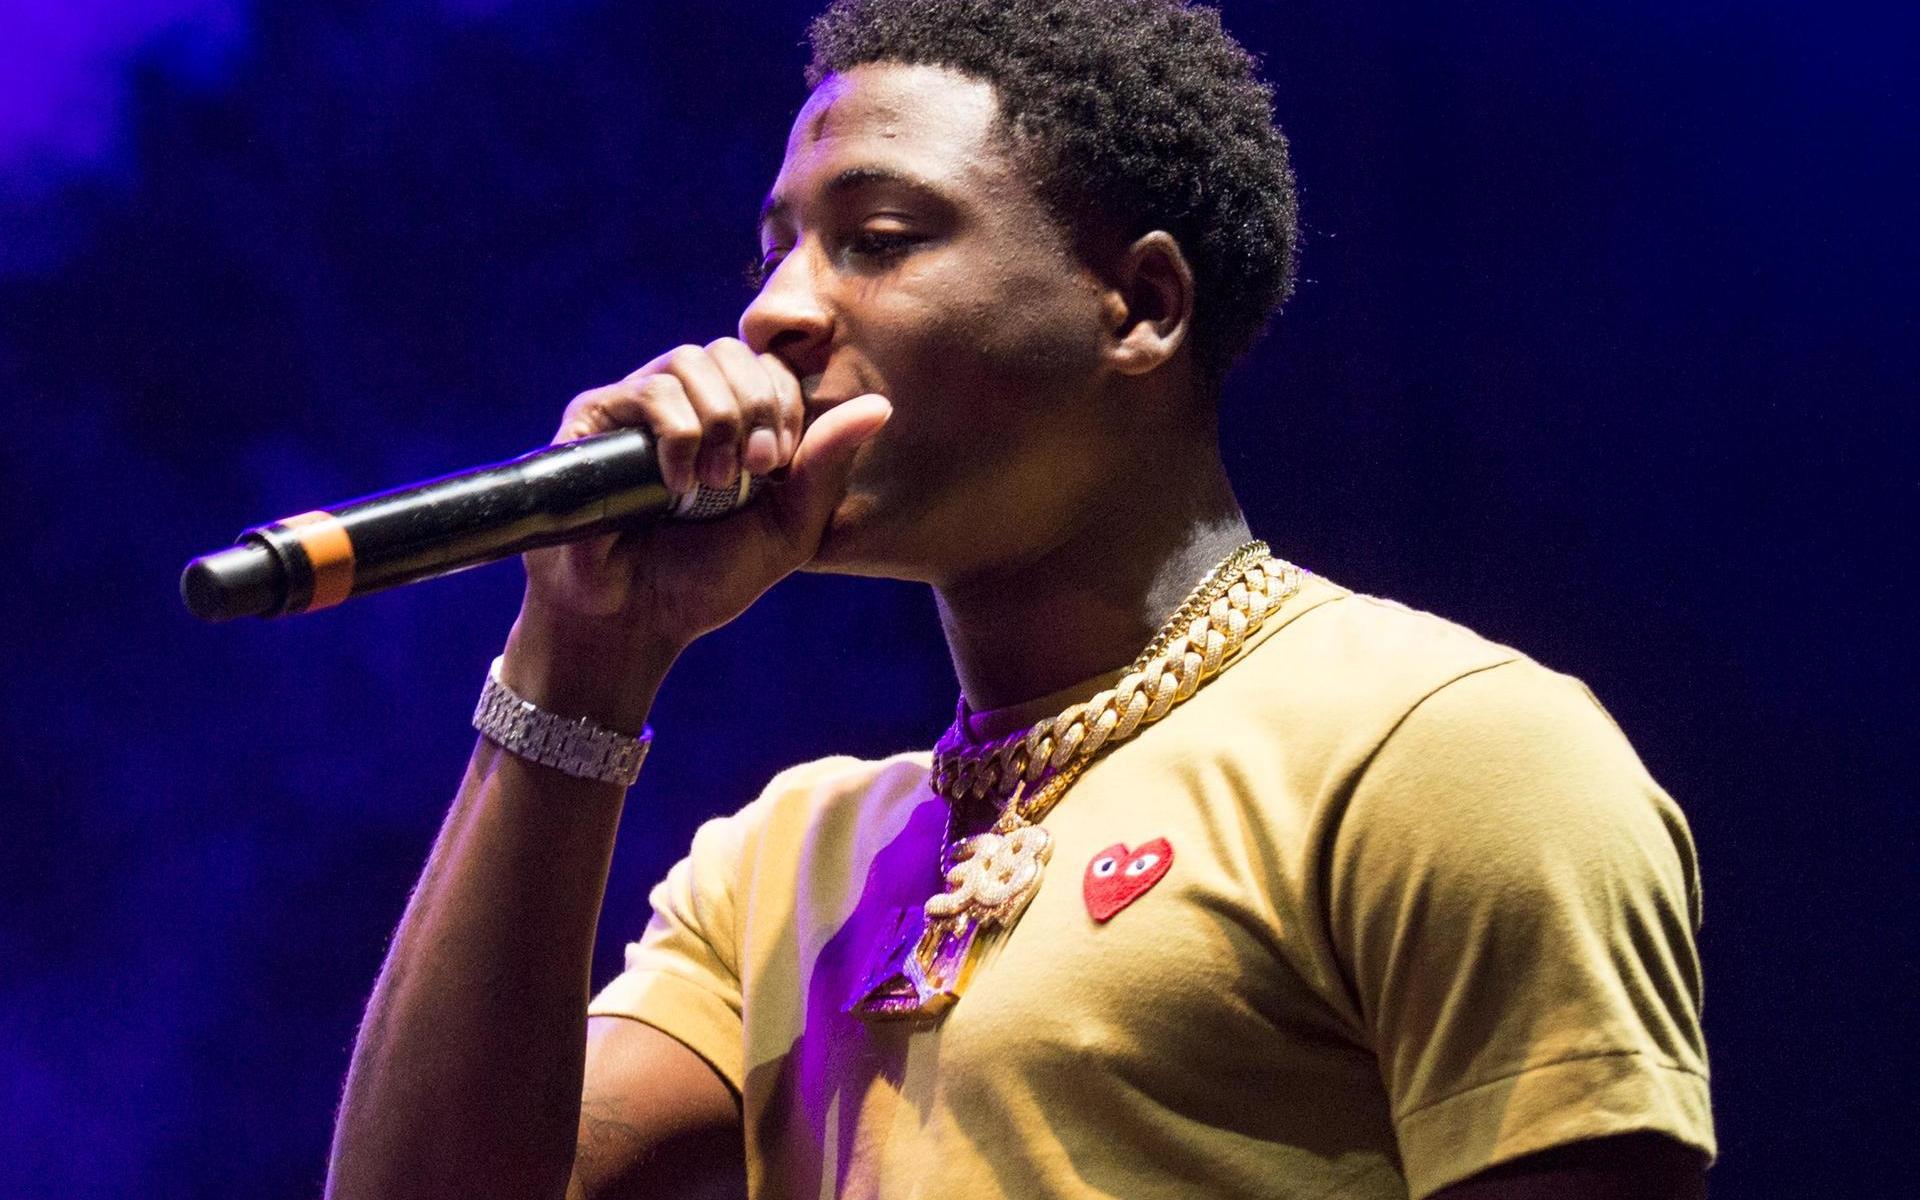 YoungBoy Never Broke Again in Baltimore (Royal Farms Arena)